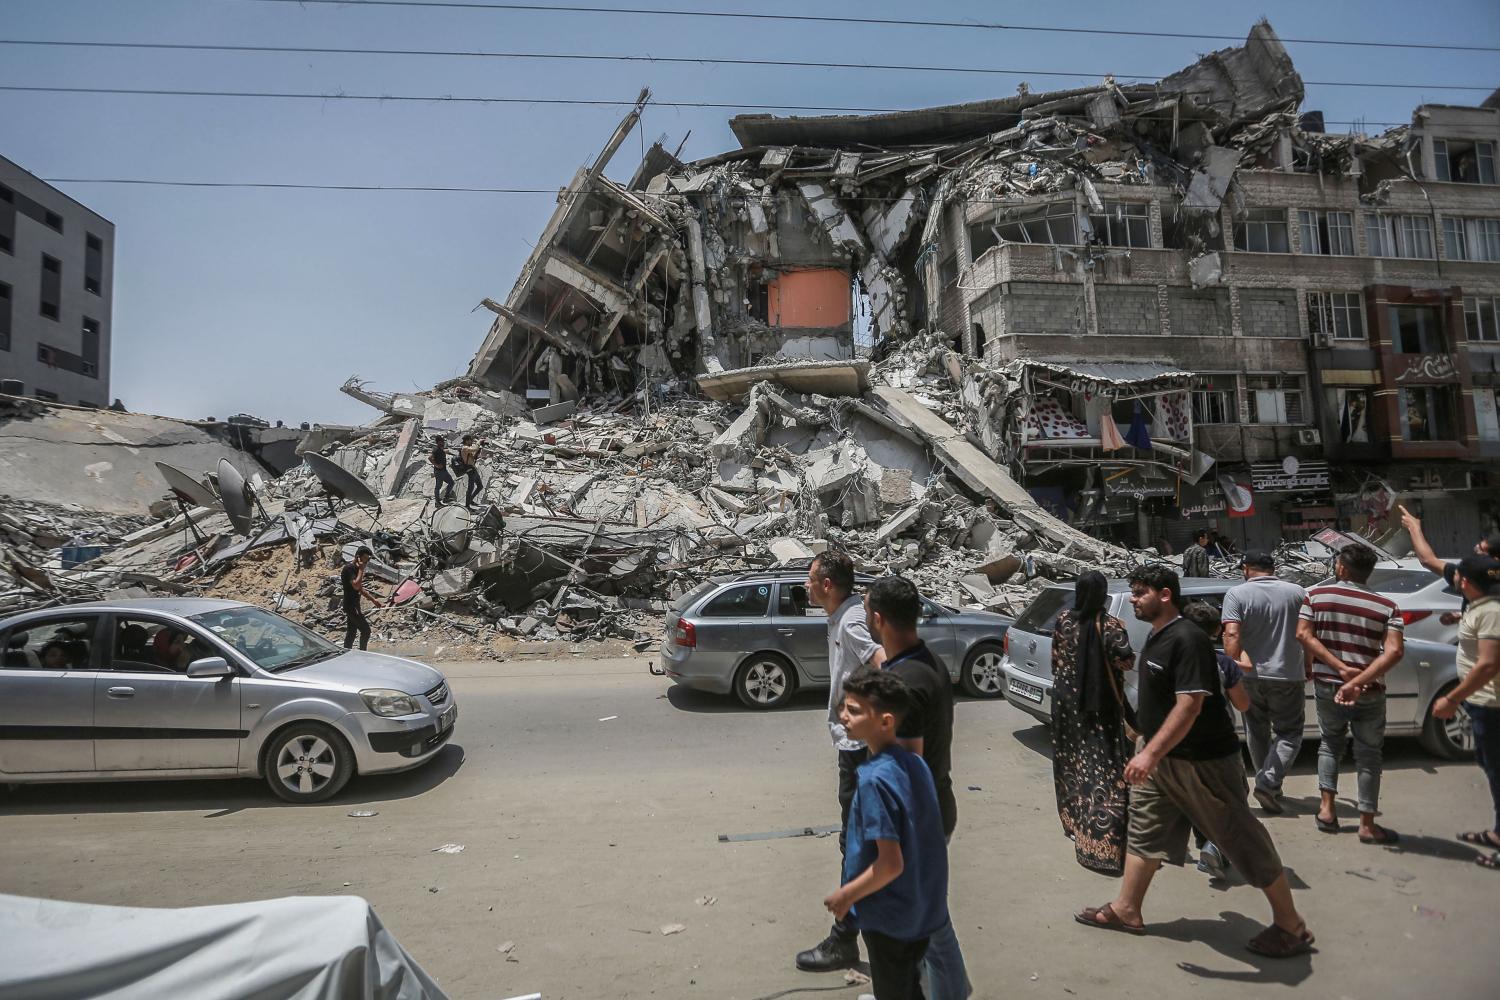 Palestinians inspect damaged buildings that were hit by Israeli airstrikes during the recent military conflict between Israel and the Palestinian enclave controlled by Hamas. Israel and Hamas have reached an agreement on the ceasefire after days of fighting in which around 230 Palestinians were killed in Israeli airstrikes and 12 people in Israel were killed by rocket fire from the Gaza Strip.